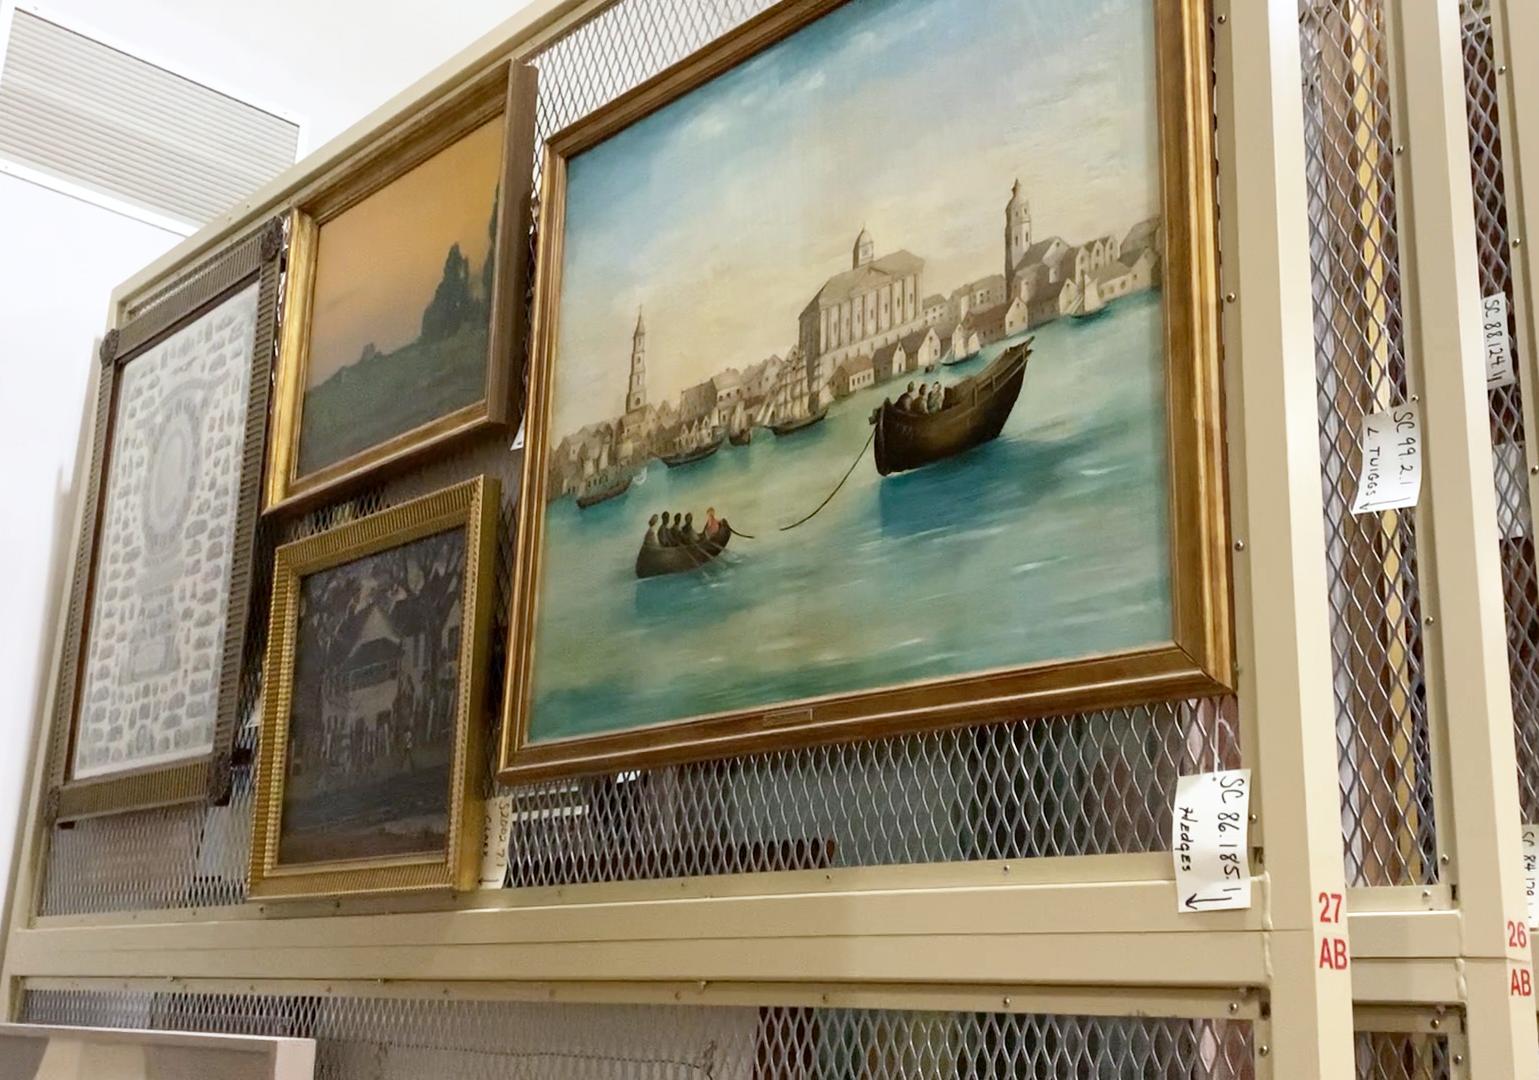 Four framed paintings are mounted on the uppermost section of a rolling rack in the museum's art storage room.